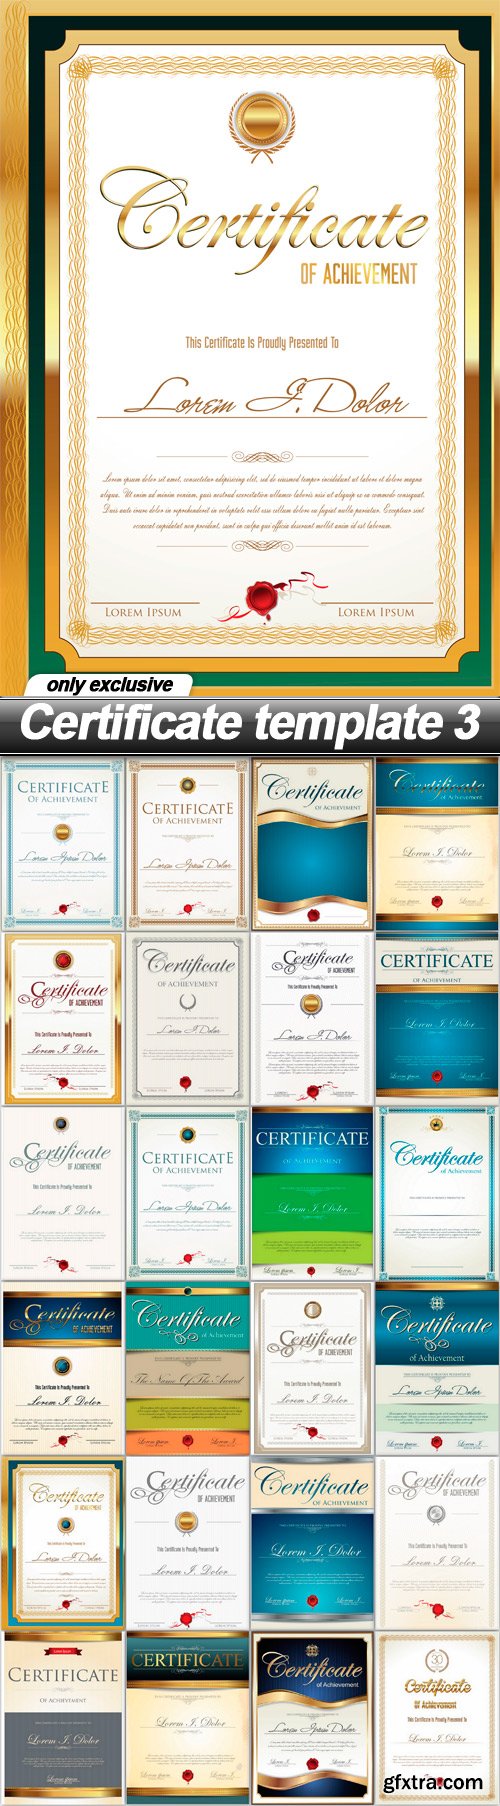 Certificate template 3 - 25 EPS